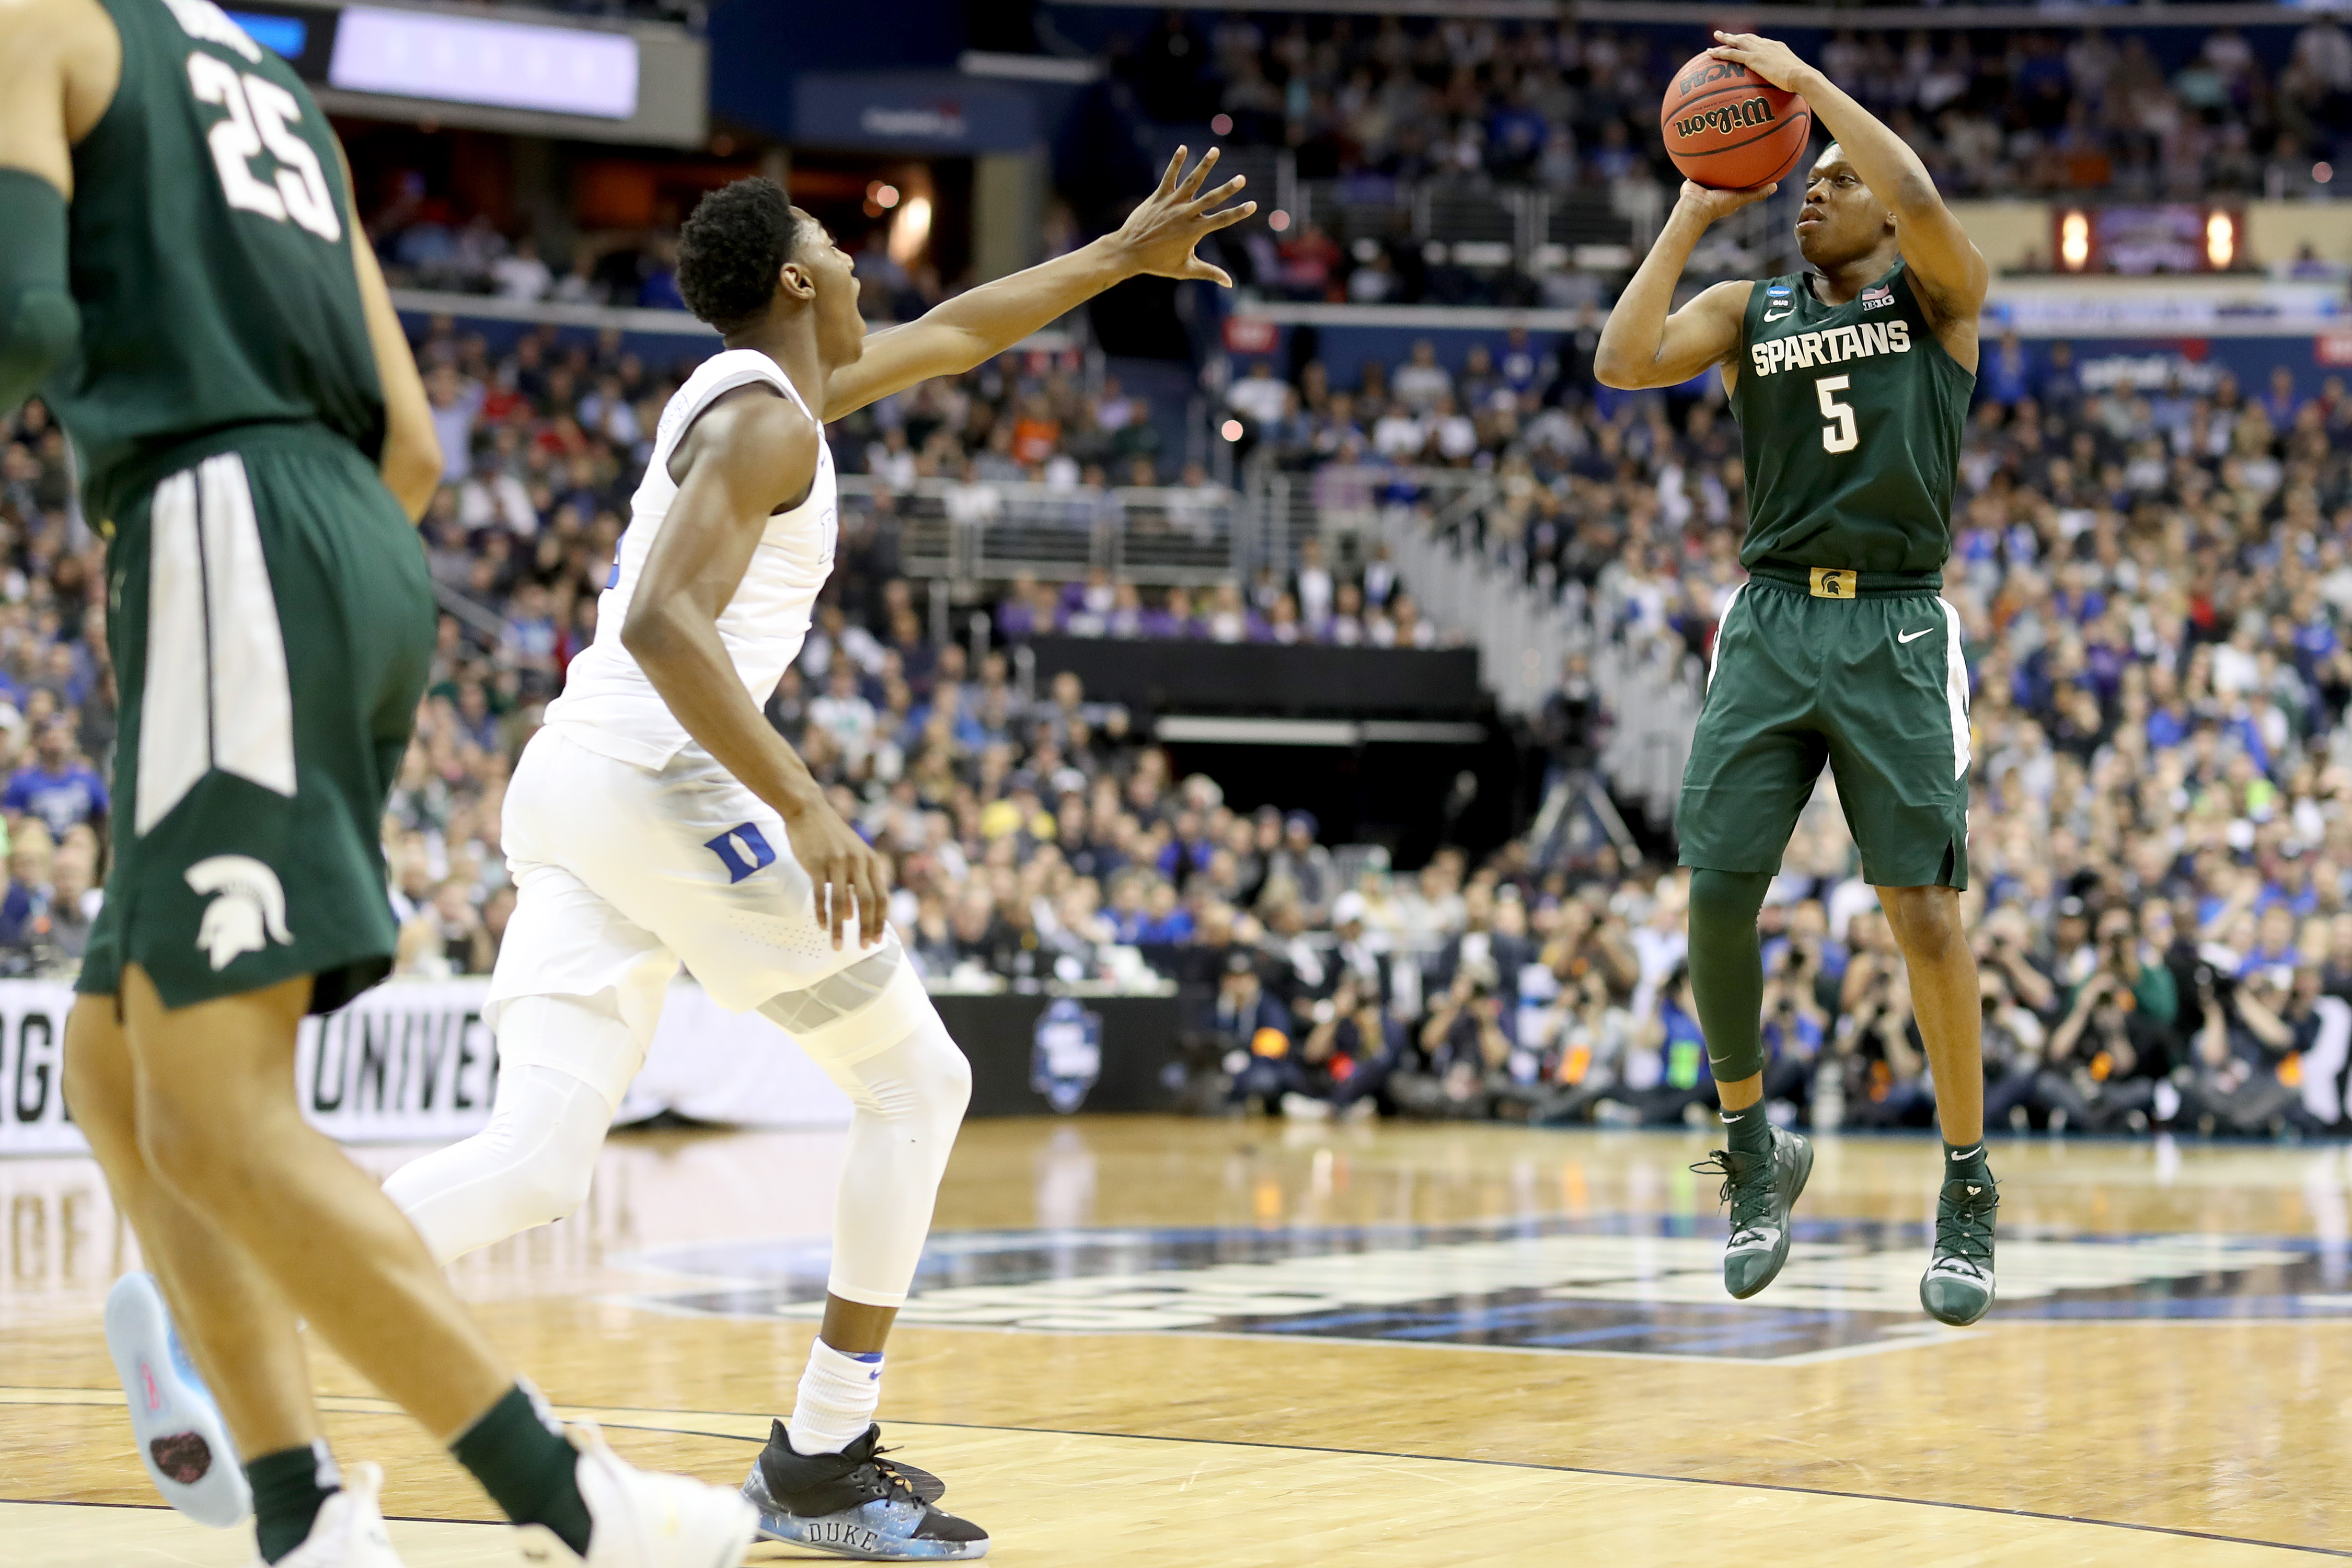 Highlight: Kenny Goins hits a three with seconds left to put Michigan State up 68-66 over Duke